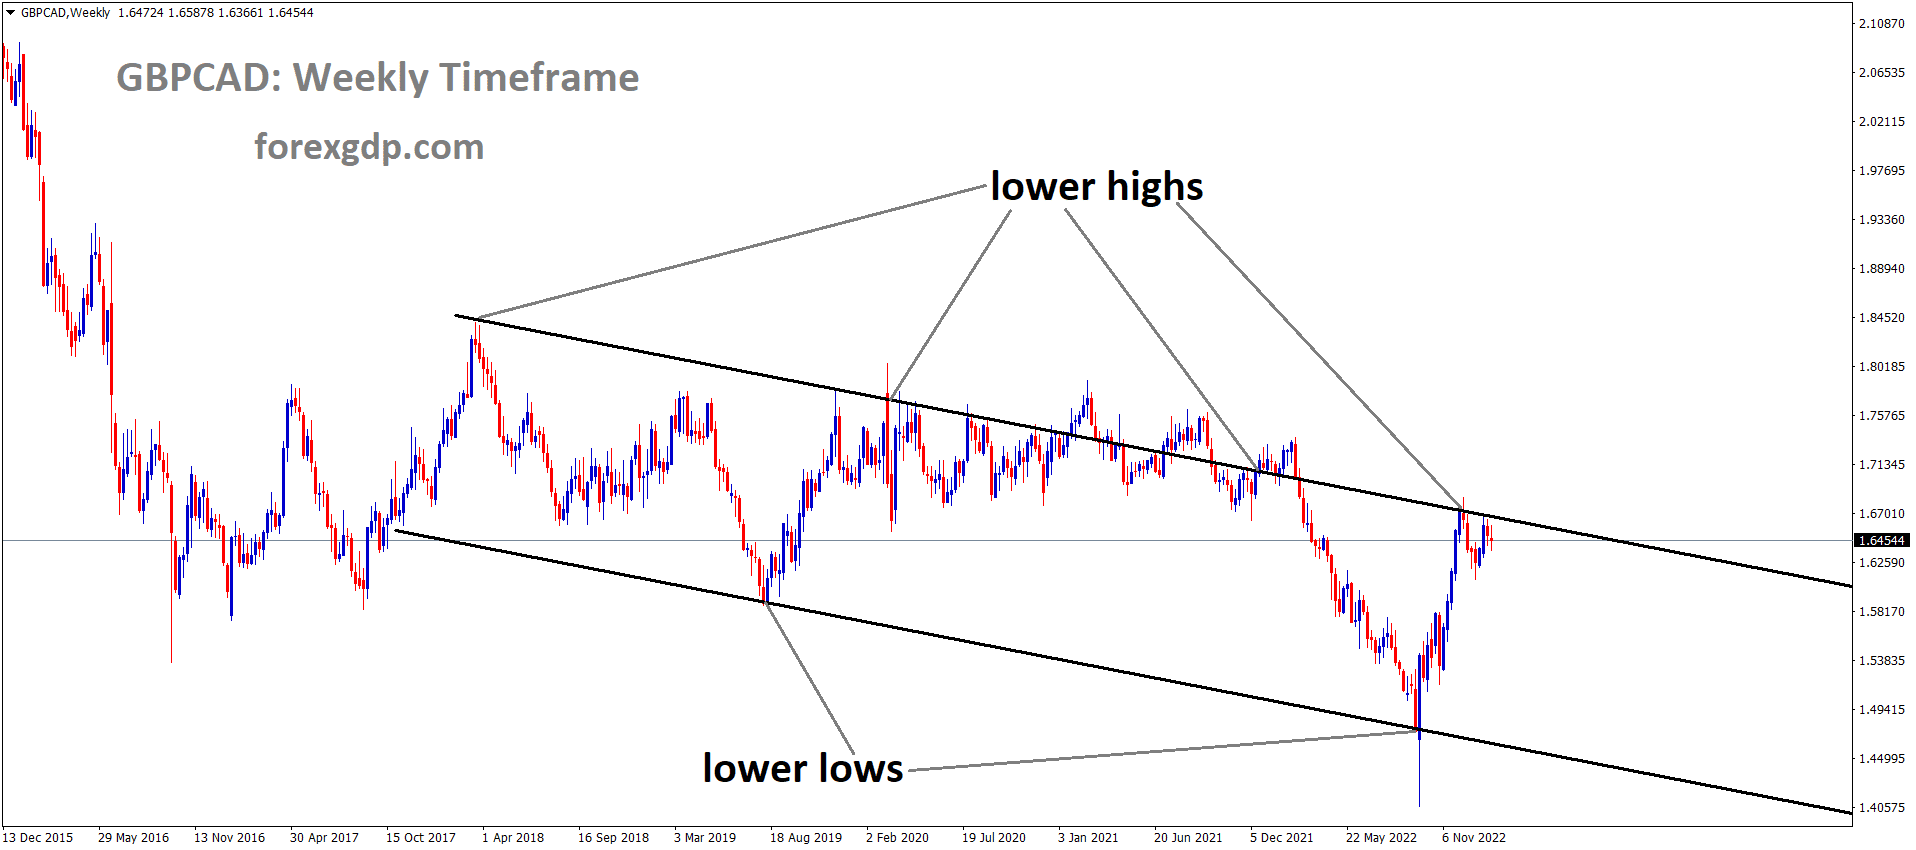 GBPCAD Weekly TF analysis Market is moving in the Descending channel and the market has reached the lower high area of the channel